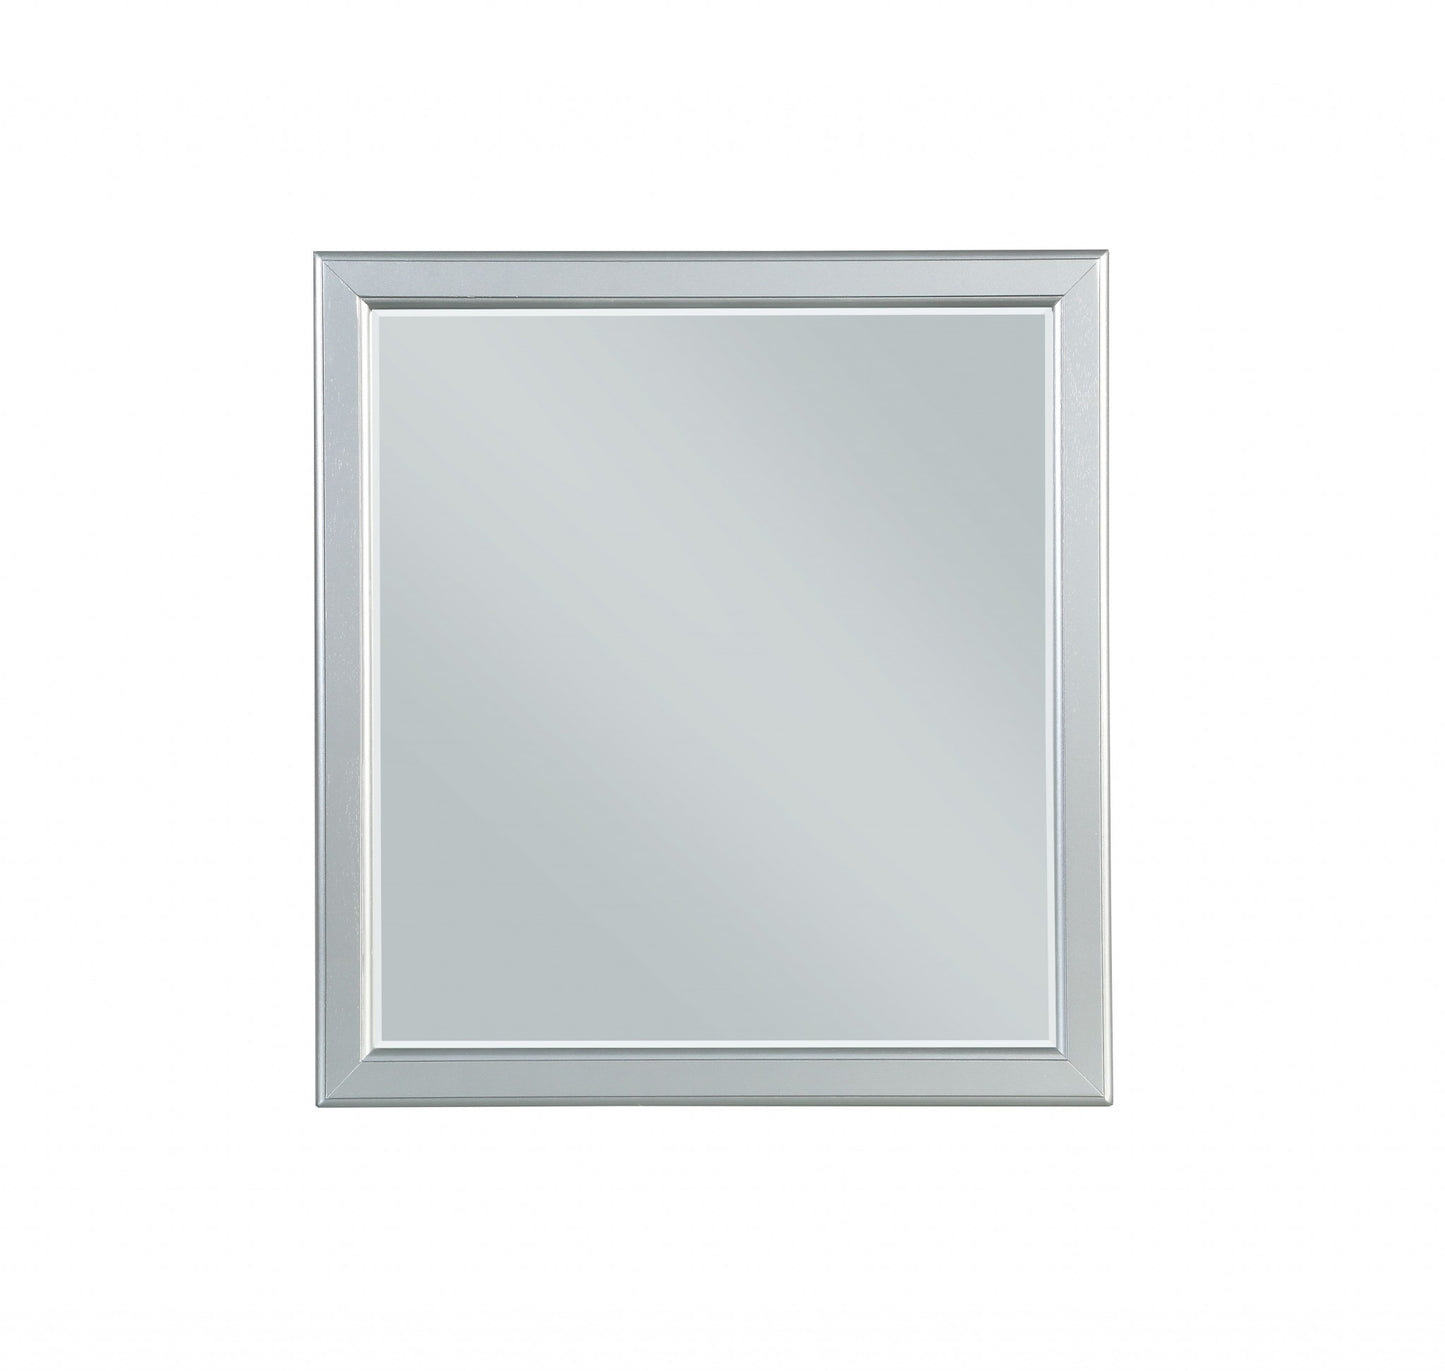 38" Silver Square Framed Accent Mirror